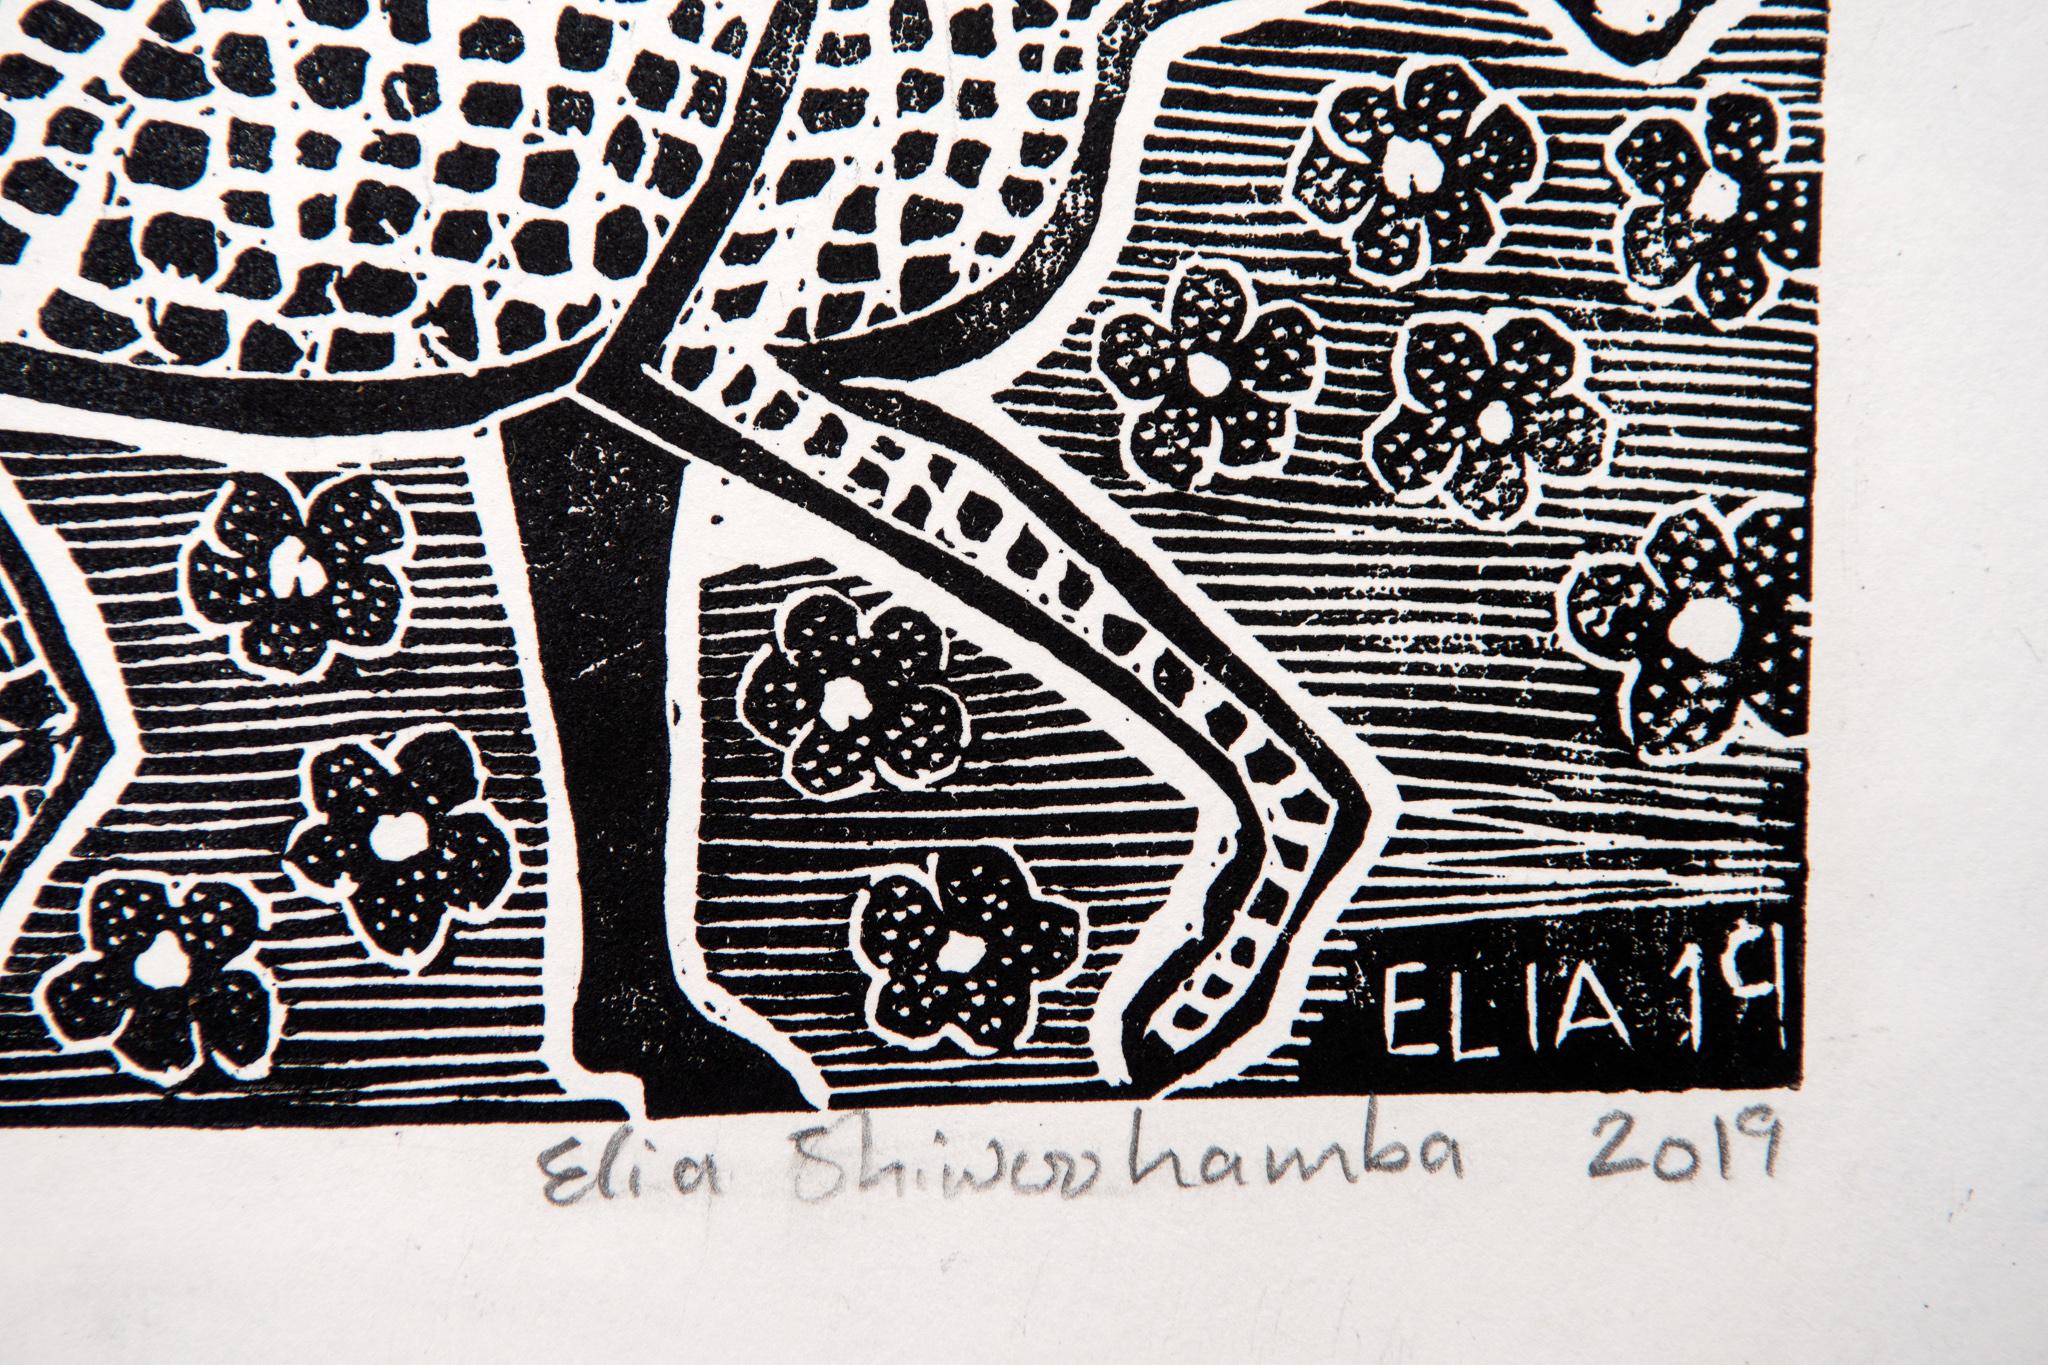 The cheetahs is on their way to hunting, Elia Shiwoohamba, Linoleum block print For Sale 1